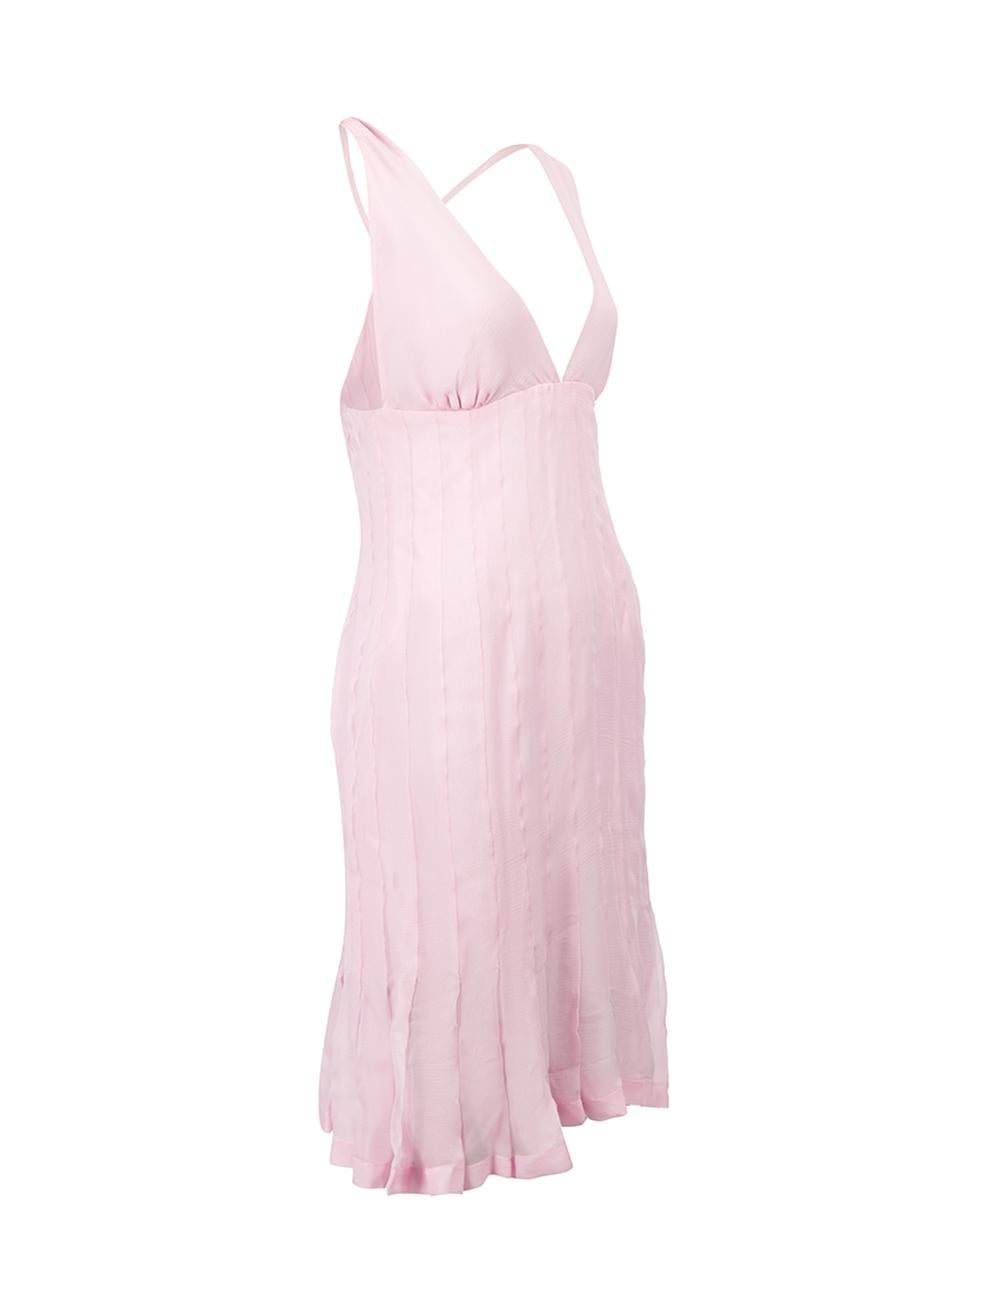 CONDITION is Very good. Hardly any visible wear to dress is evident though some fabric fraying is evident at the bottom of pleats above the hem of this used Chanel designer resale item.



Details


2004

Pink

Silk

Knee length